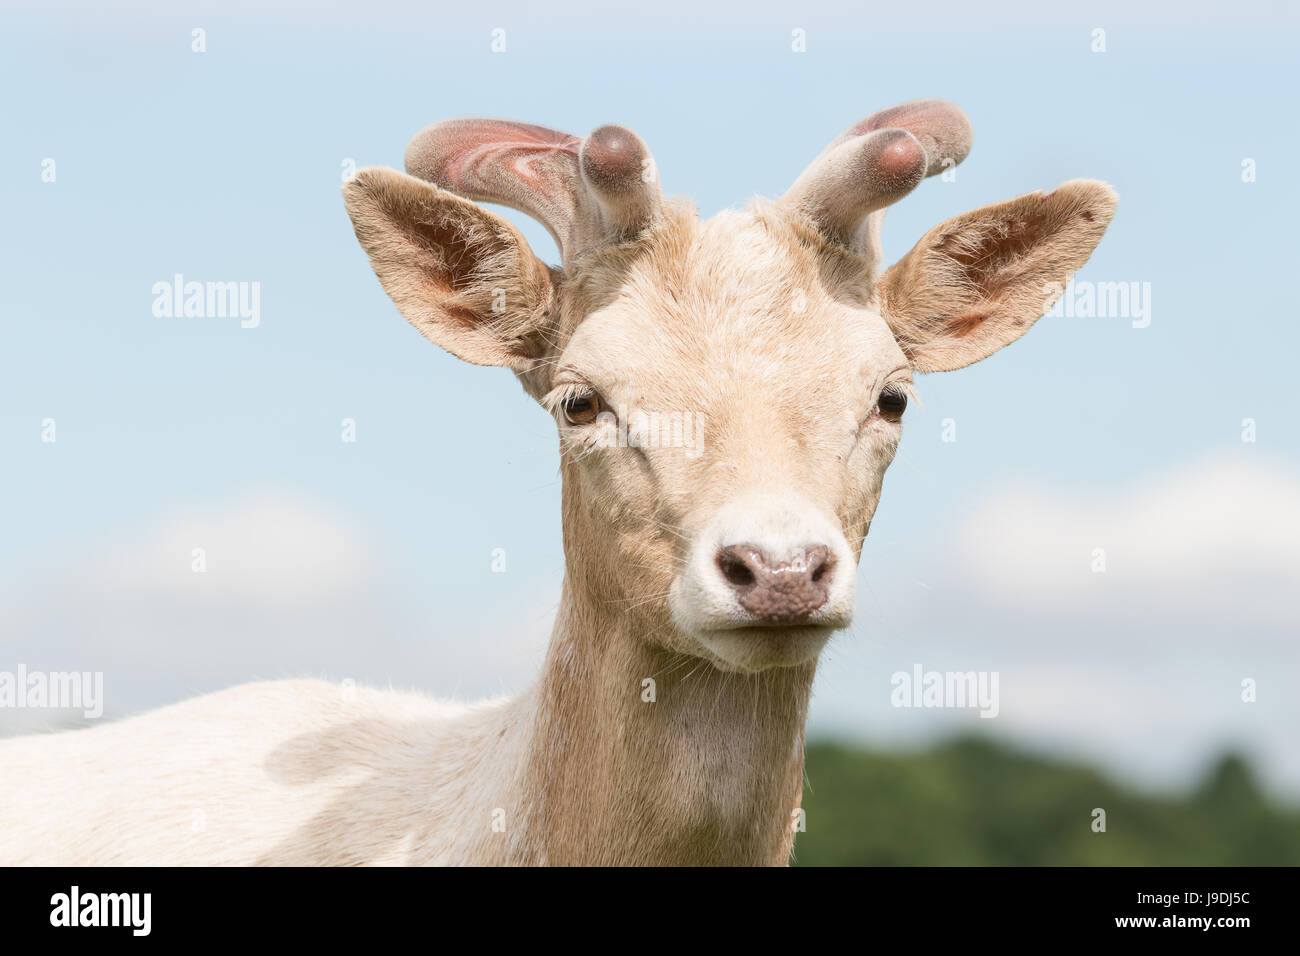 Albino white red deer with unusual pink antlers Stock Photo